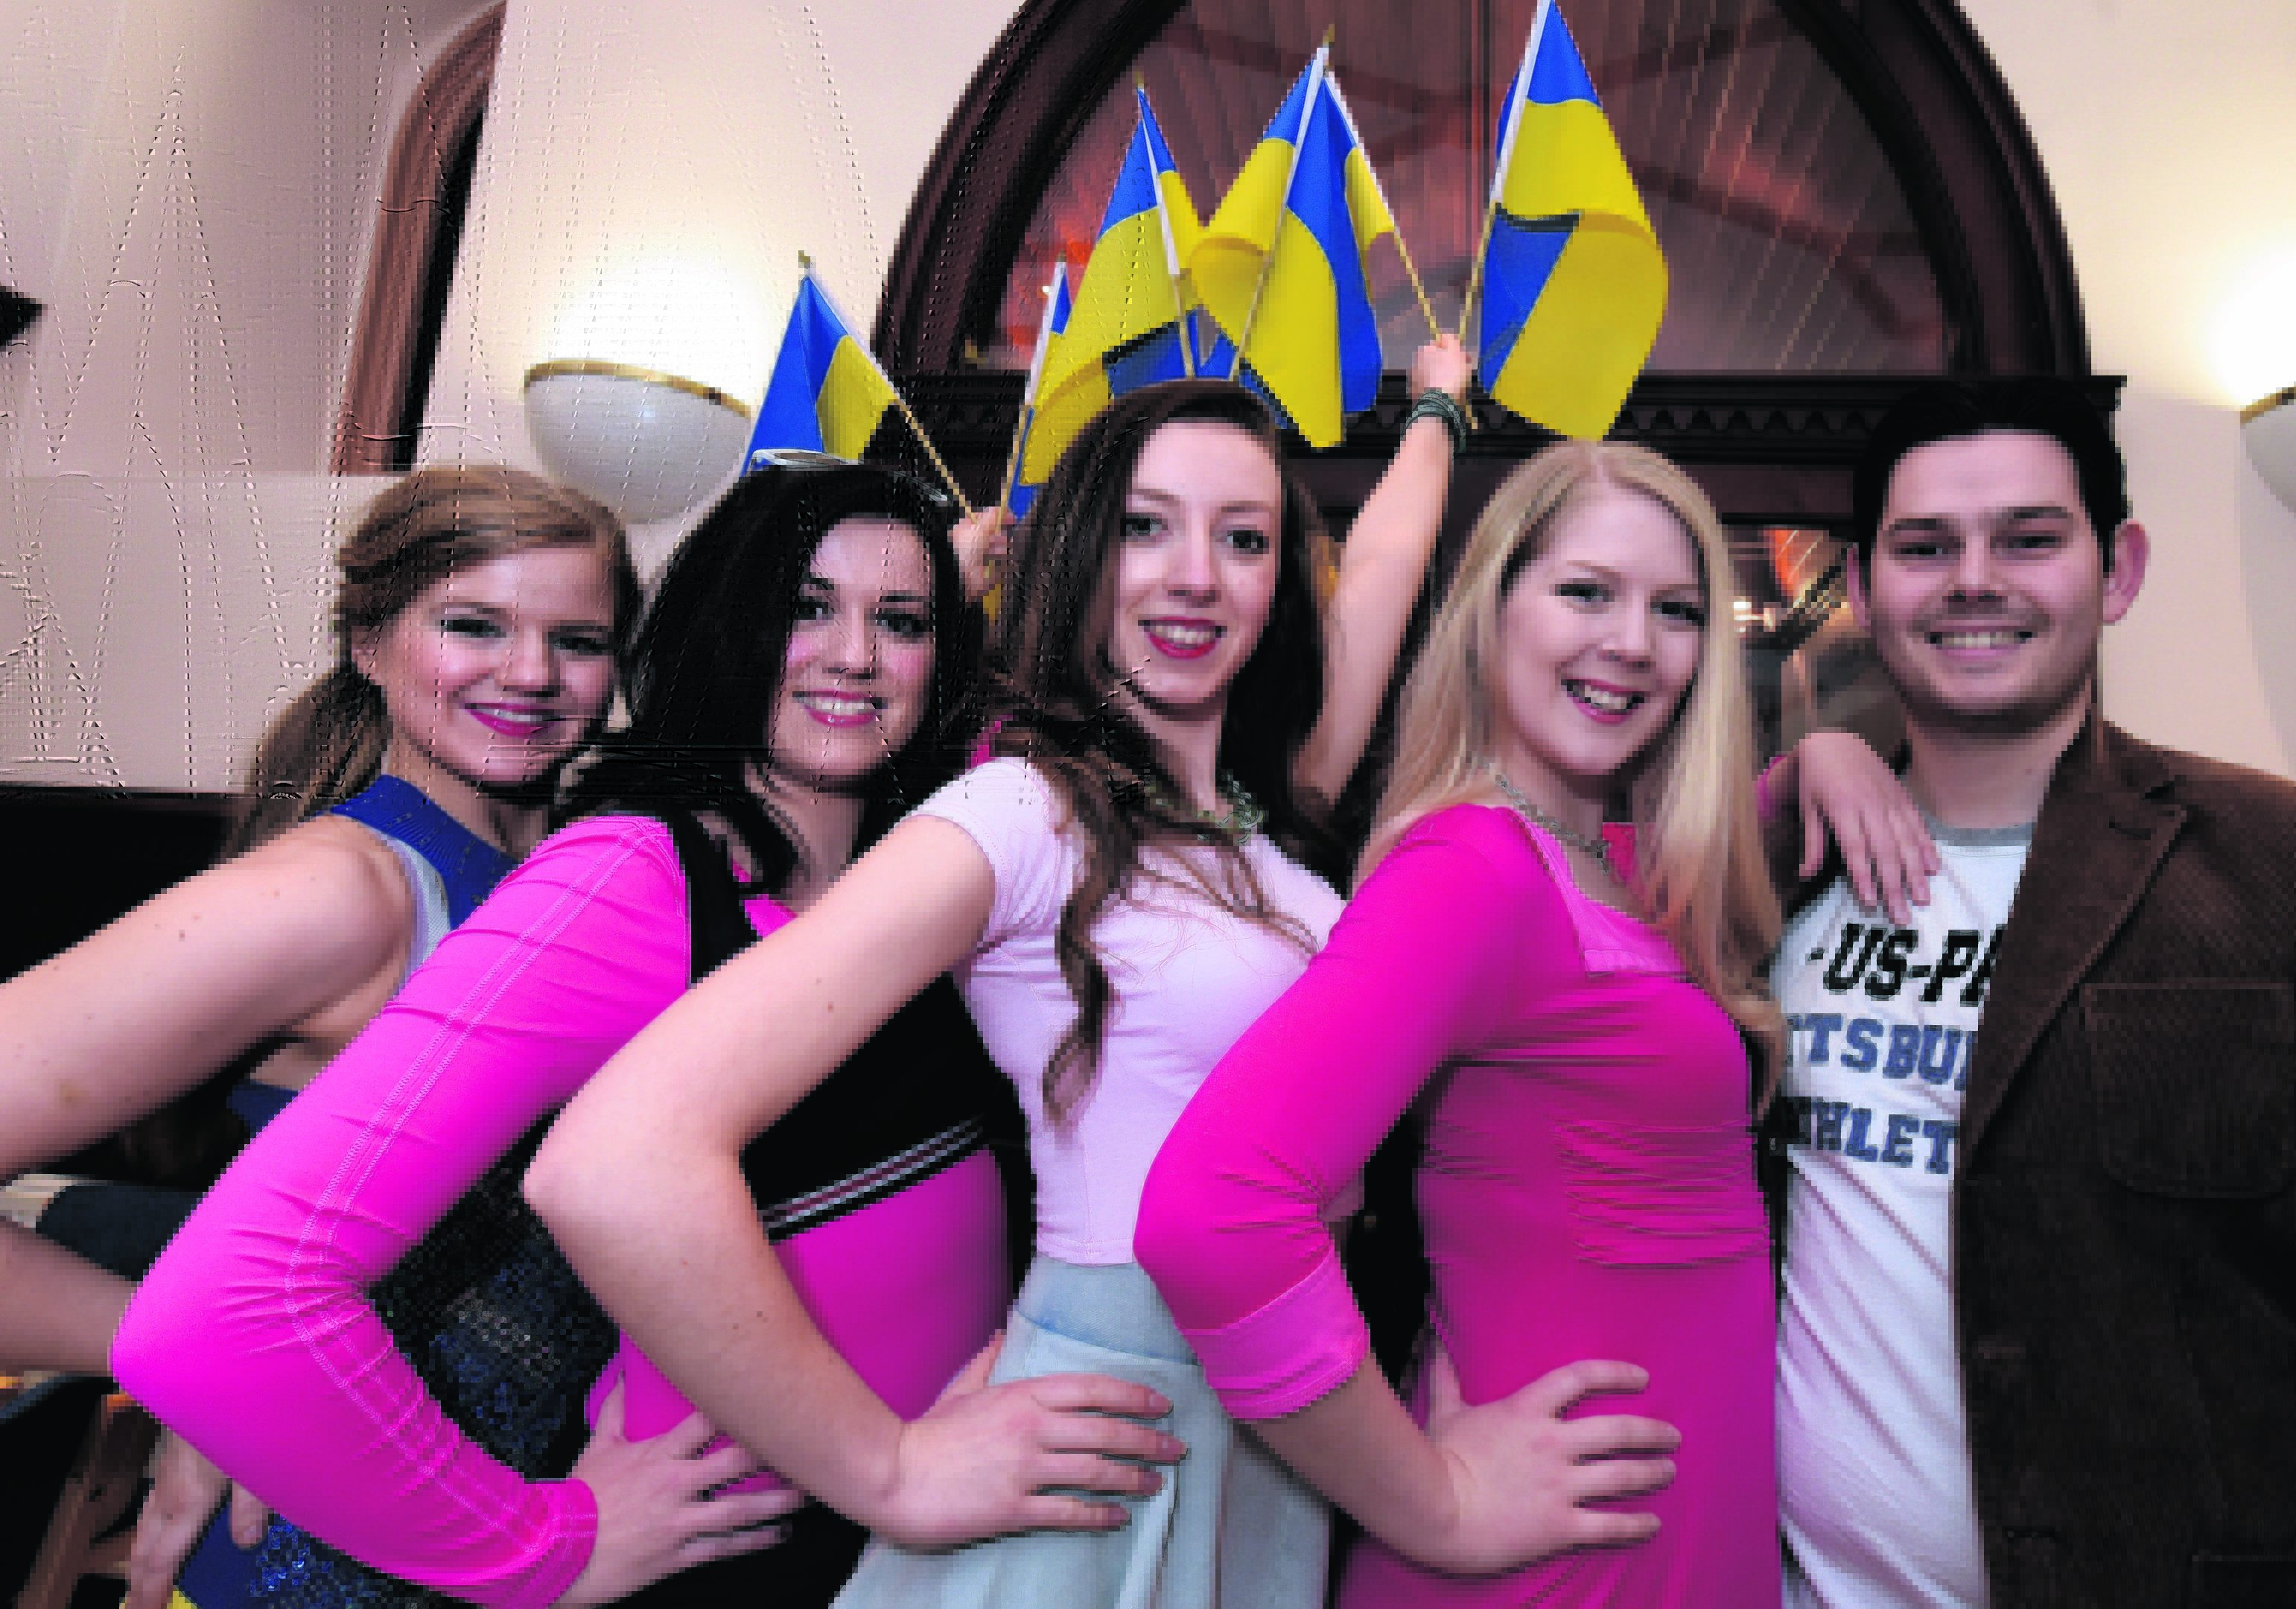 Legally Blonde cast members, from left: Aneeka Anderson, Jen Birtwistle, Colette Murray, Katie Milne and Ian Baxter. PHOTO: Jim Irvine